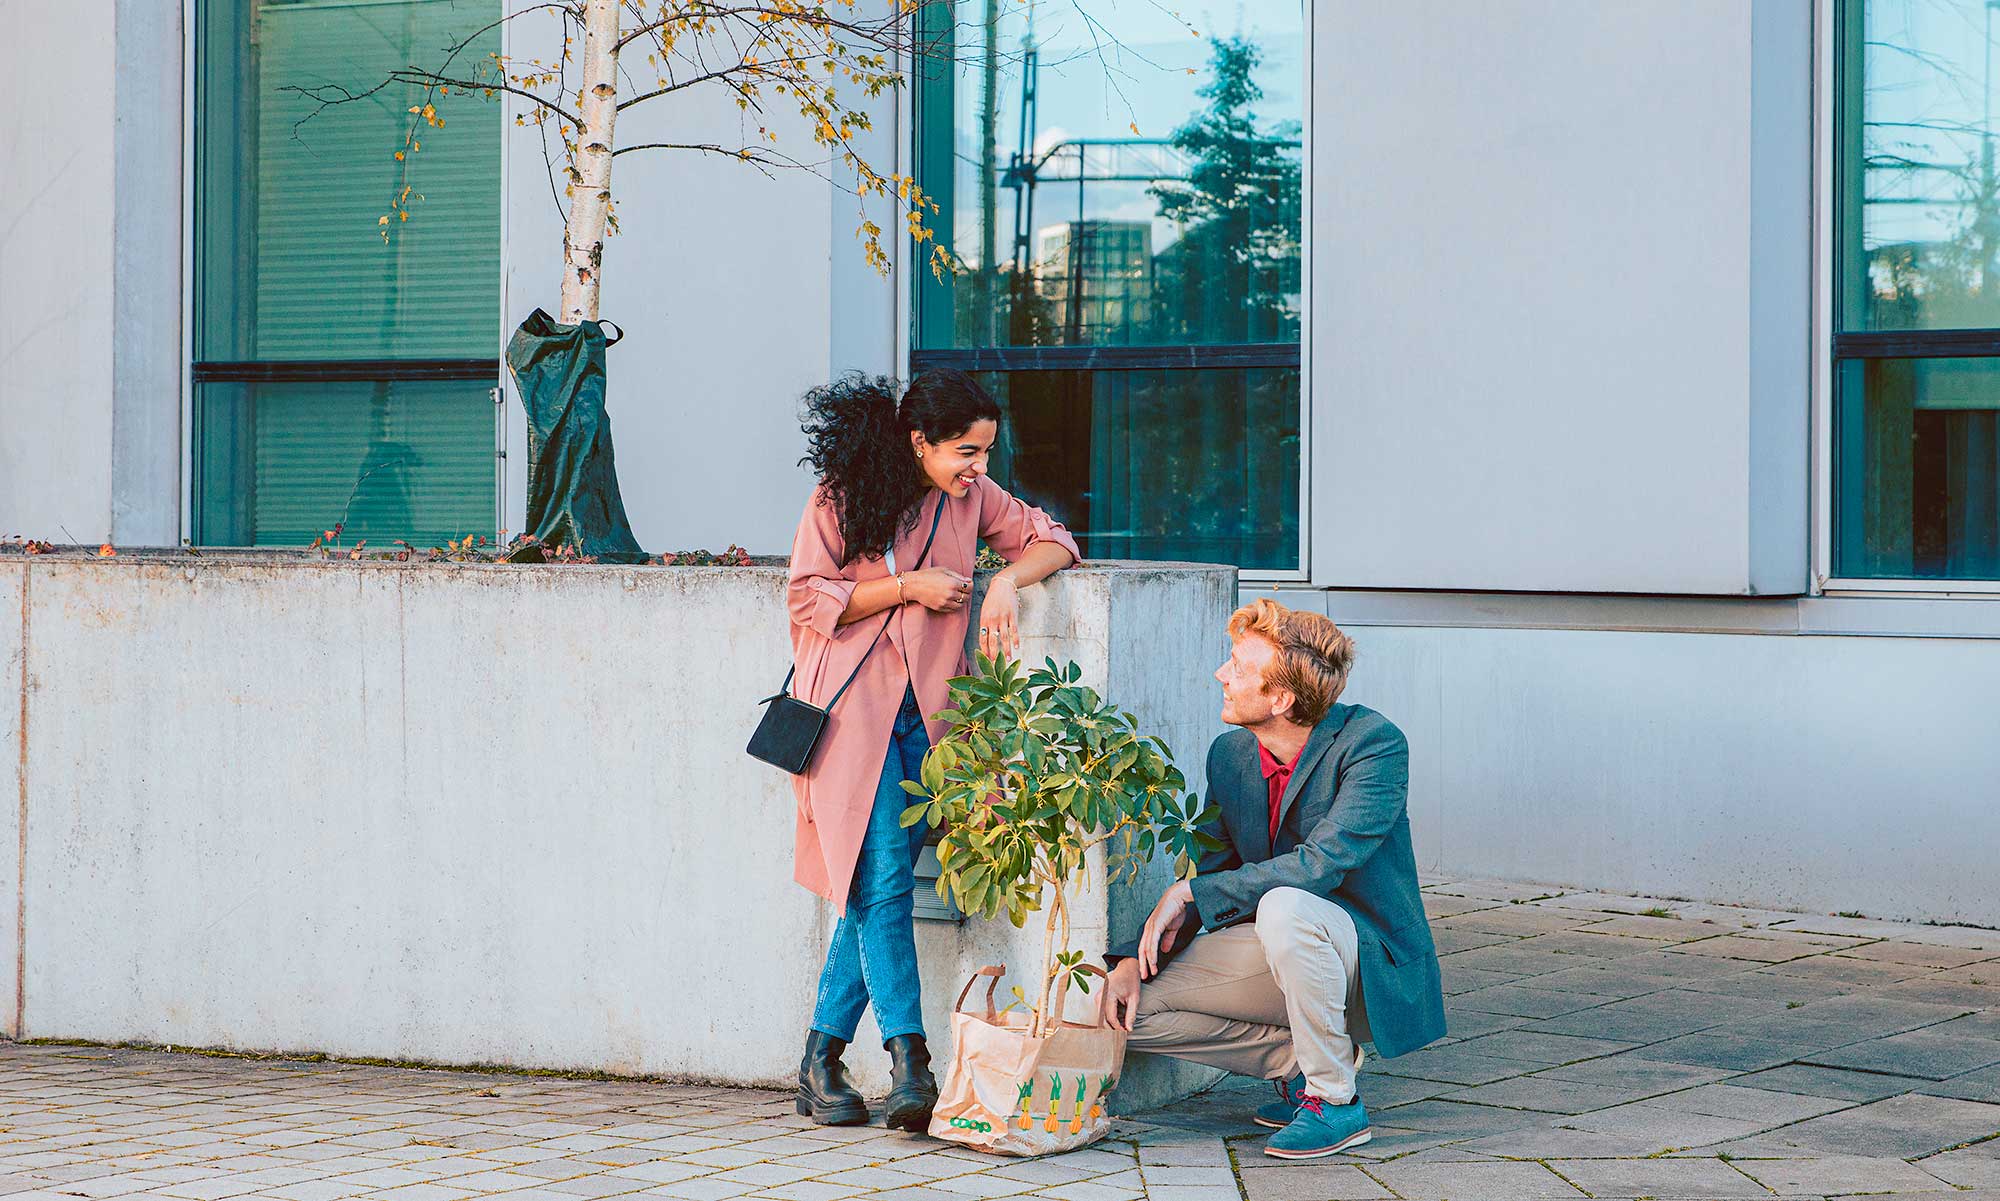 Man and woman standing in front of a building with a plant in a bag.